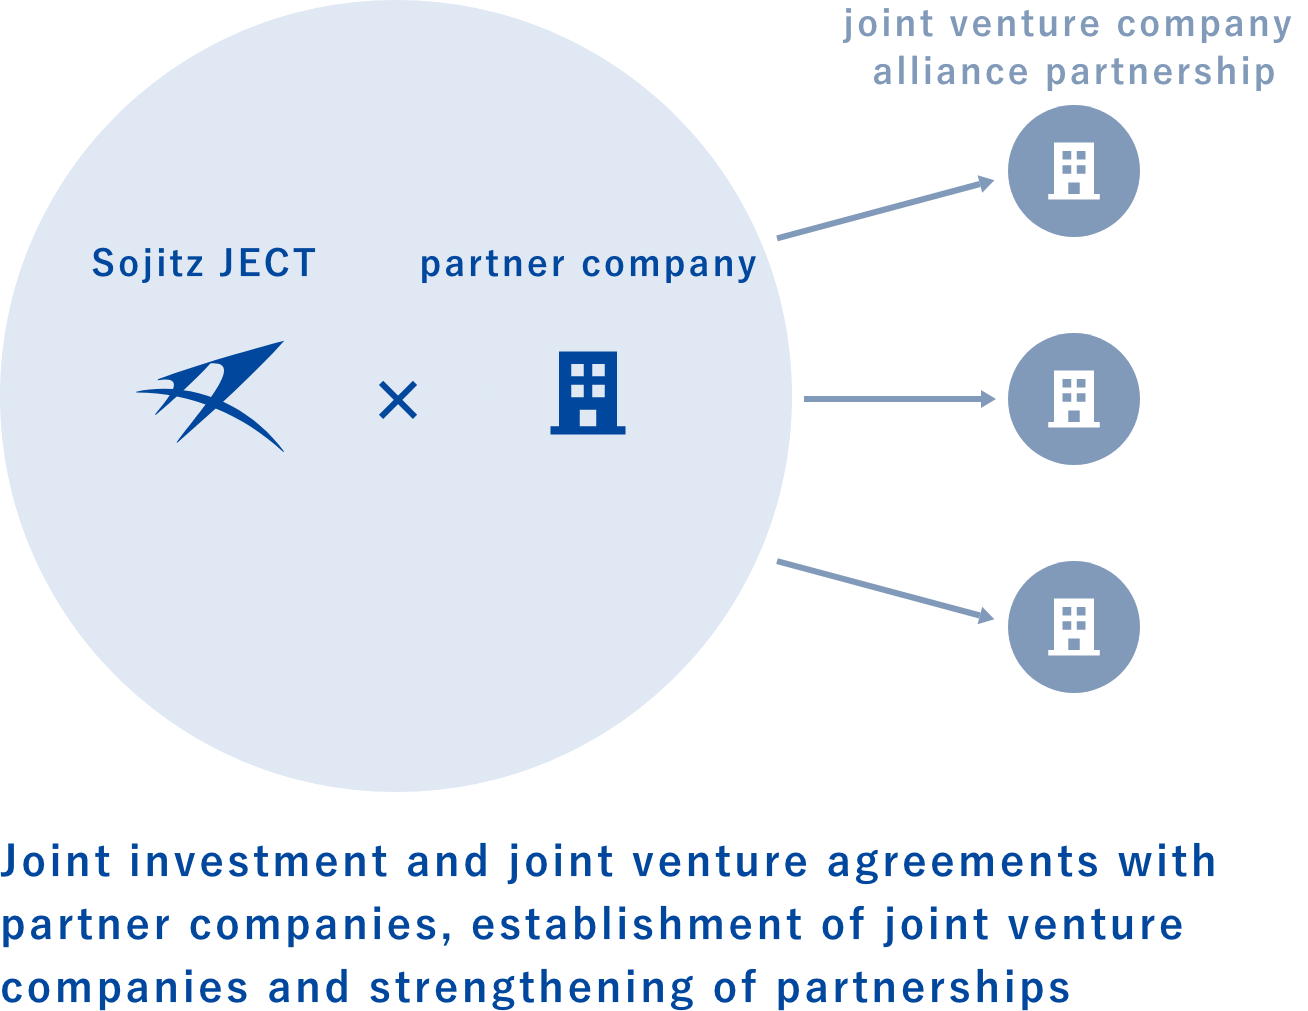 Joint investment and joint venture agreements with partner companies, establishment of joint venture companies and strengthening of partnerships